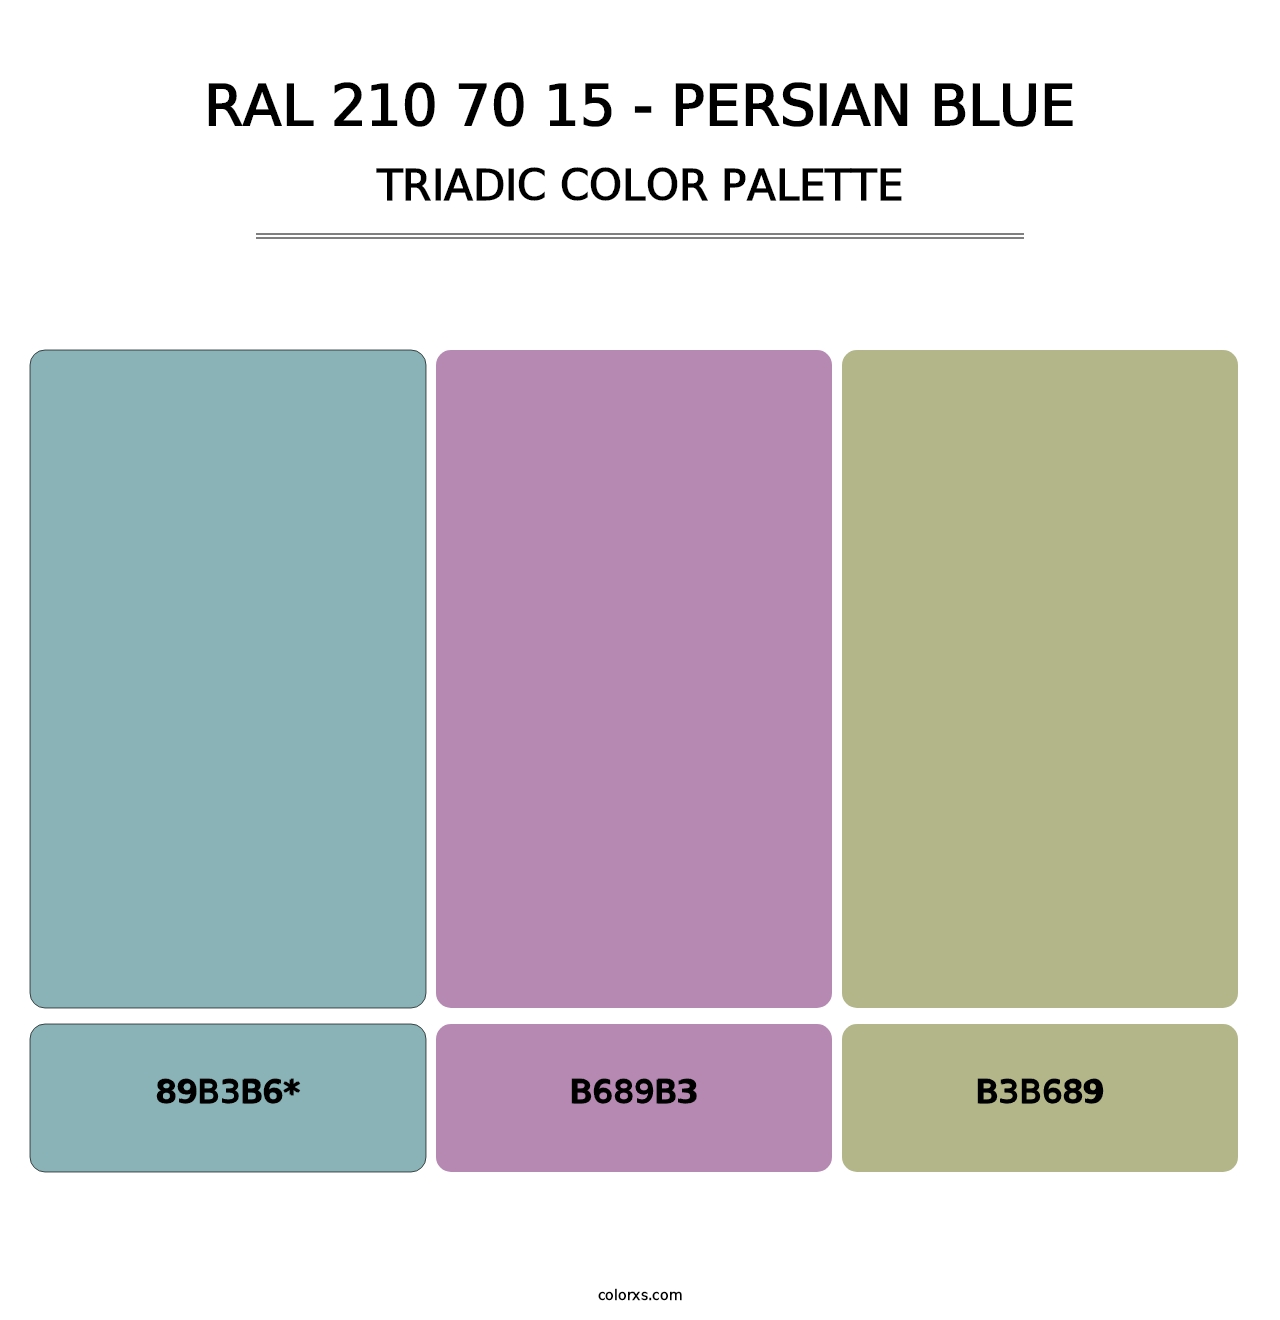 RAL 210 70 15 - Persian Blue - Triadic Color Palette